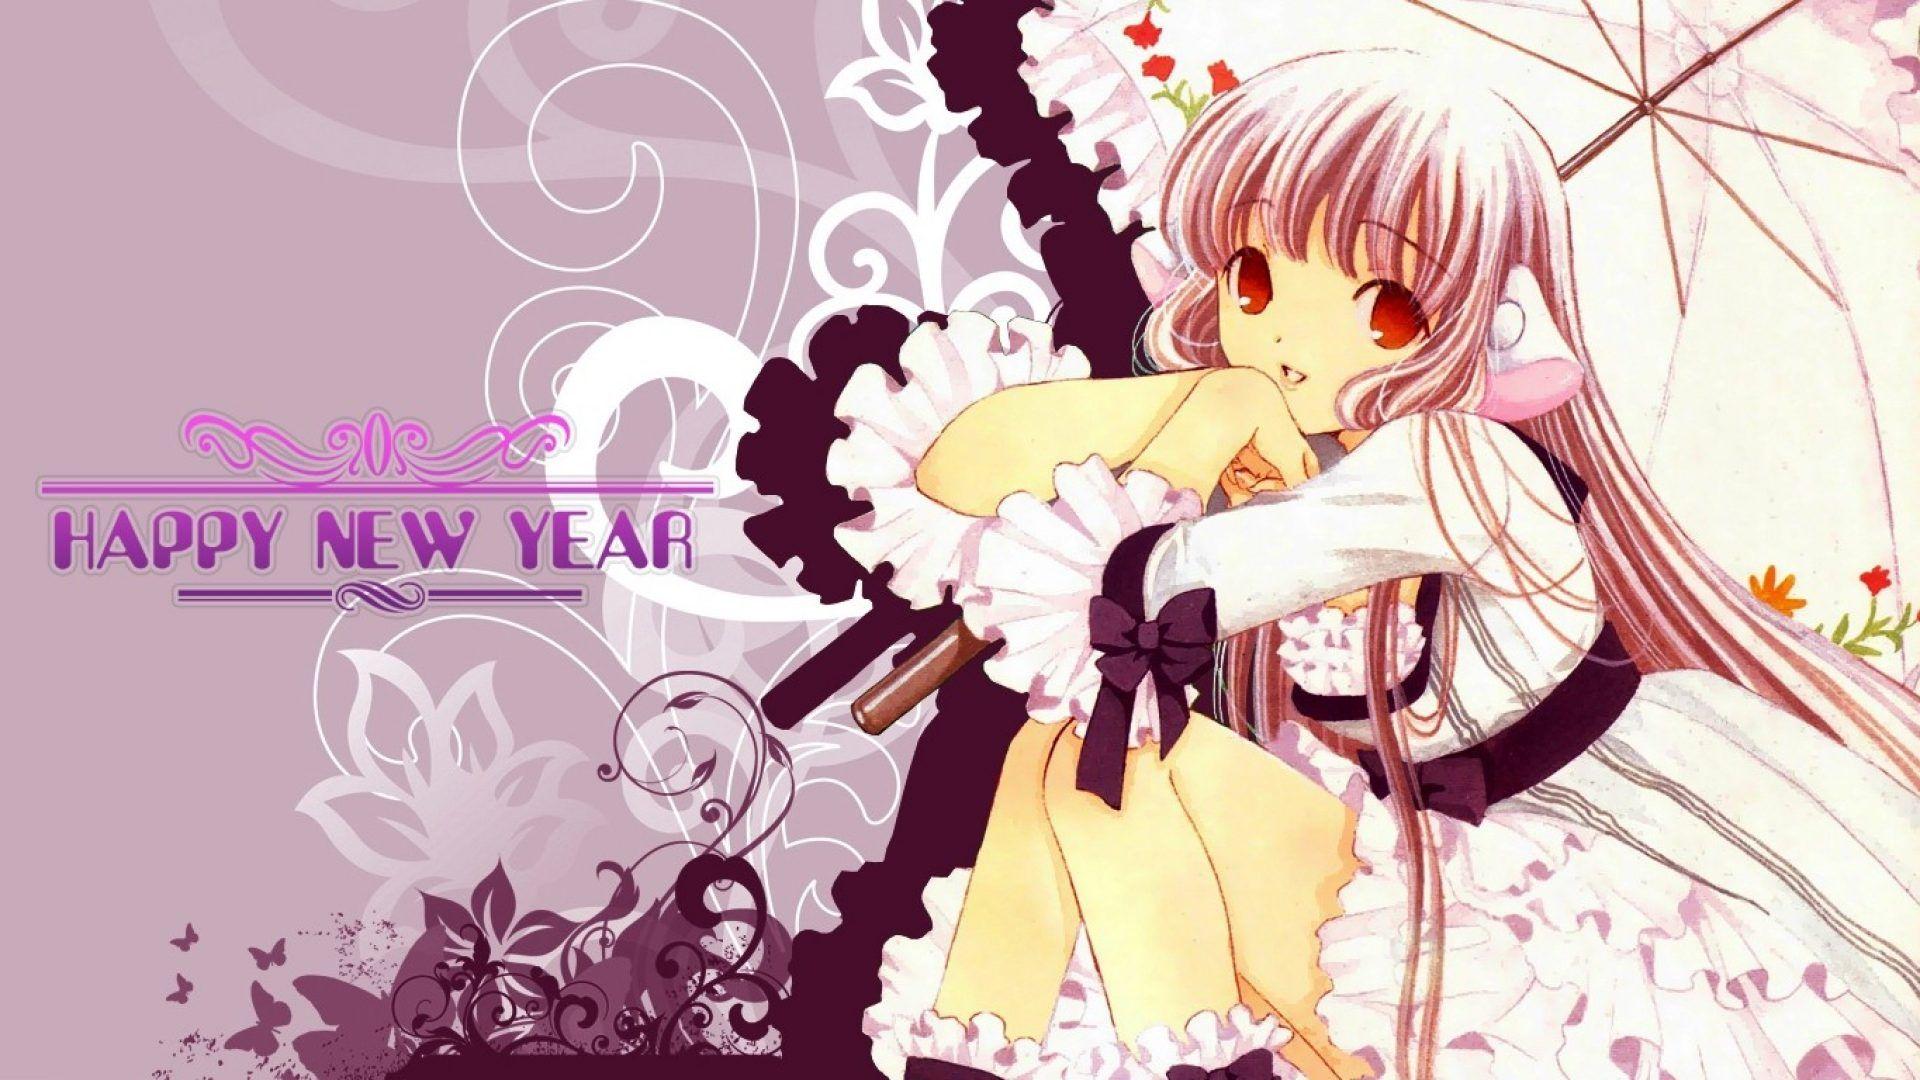 Anime New Year Wallpaper Anime New Year Quotes Anime Girl New Year 2019 HD Wallpaper